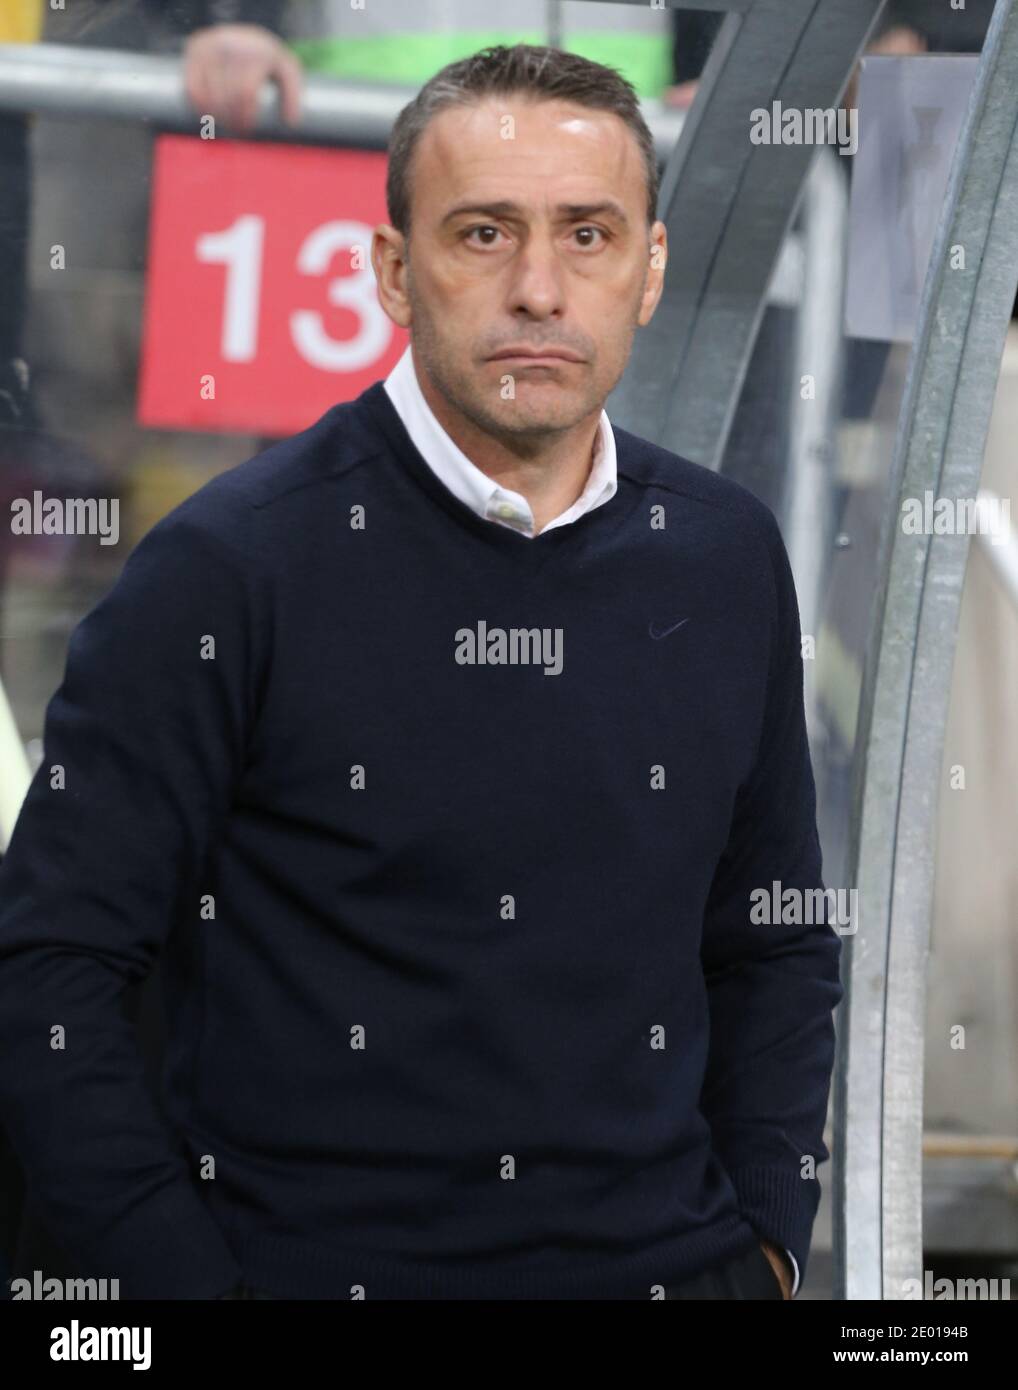 Portugal's coach Paulo Bento during the FIFA 2014 World Cup qualifying play-off second leg football match between portugal and Sweden at the Friends Arena in Solna, near Stockholm, on November 19, 2013. Photo by Giuliano Bevilacqua/ABACAPRESS.COM Stock Photo